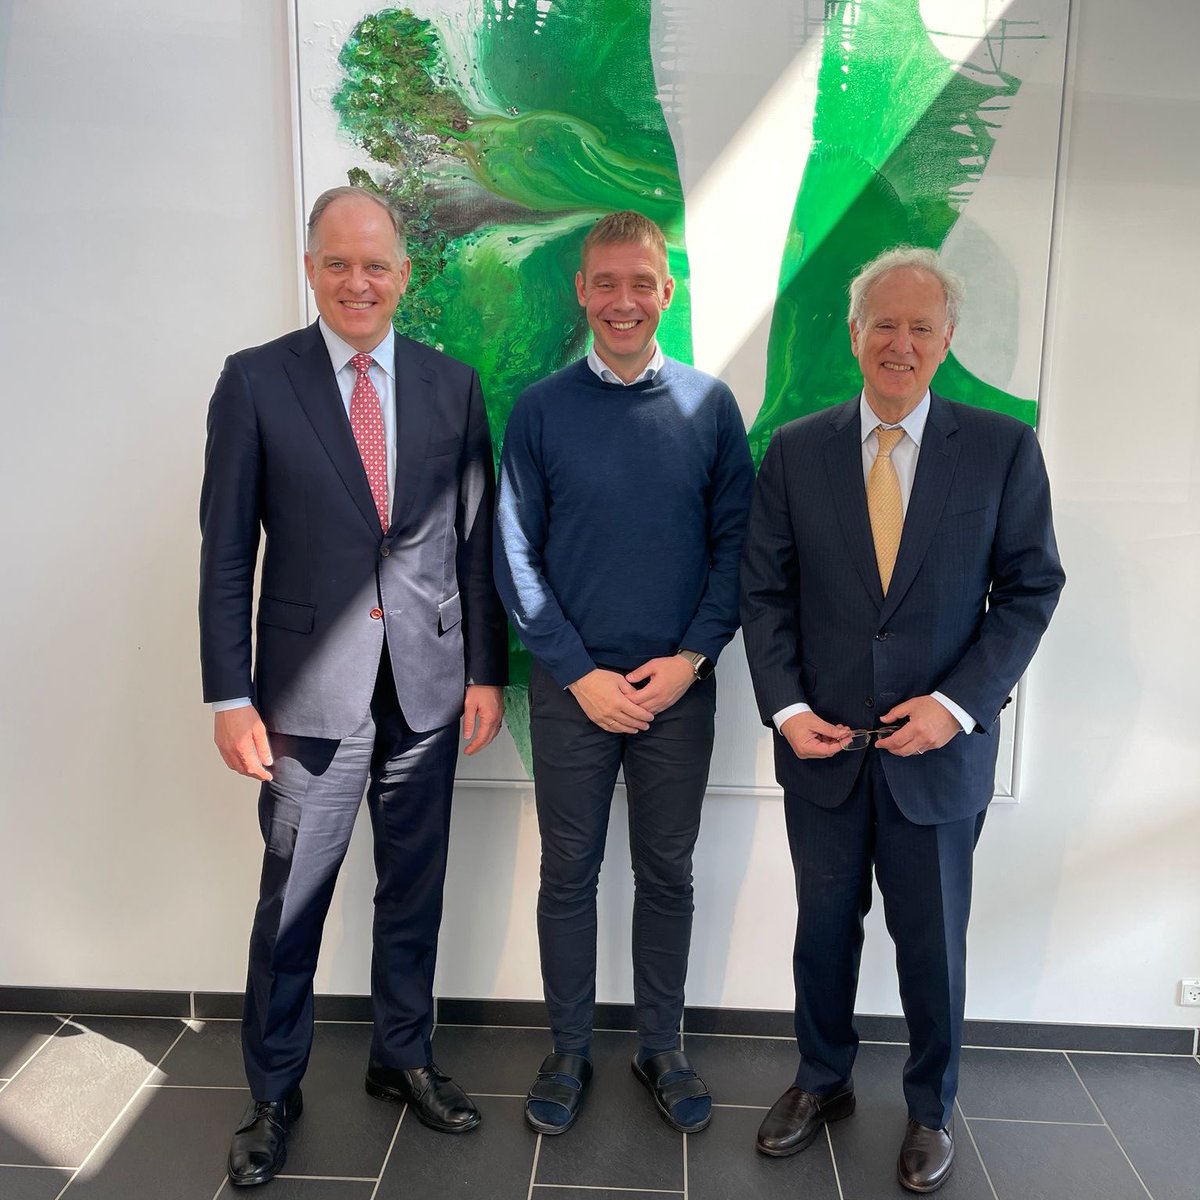 Thanks to #hiddenfjord for the opportunity to learn more about salmon farming here in the Faroe Islands from Óli Hansen. Their strong exports to the United States are a great example of 🇺🇸 and 🇫🇴 trade ties. Great to be joined by @StateDept‘s Deputy Assistant Secretary Douglas